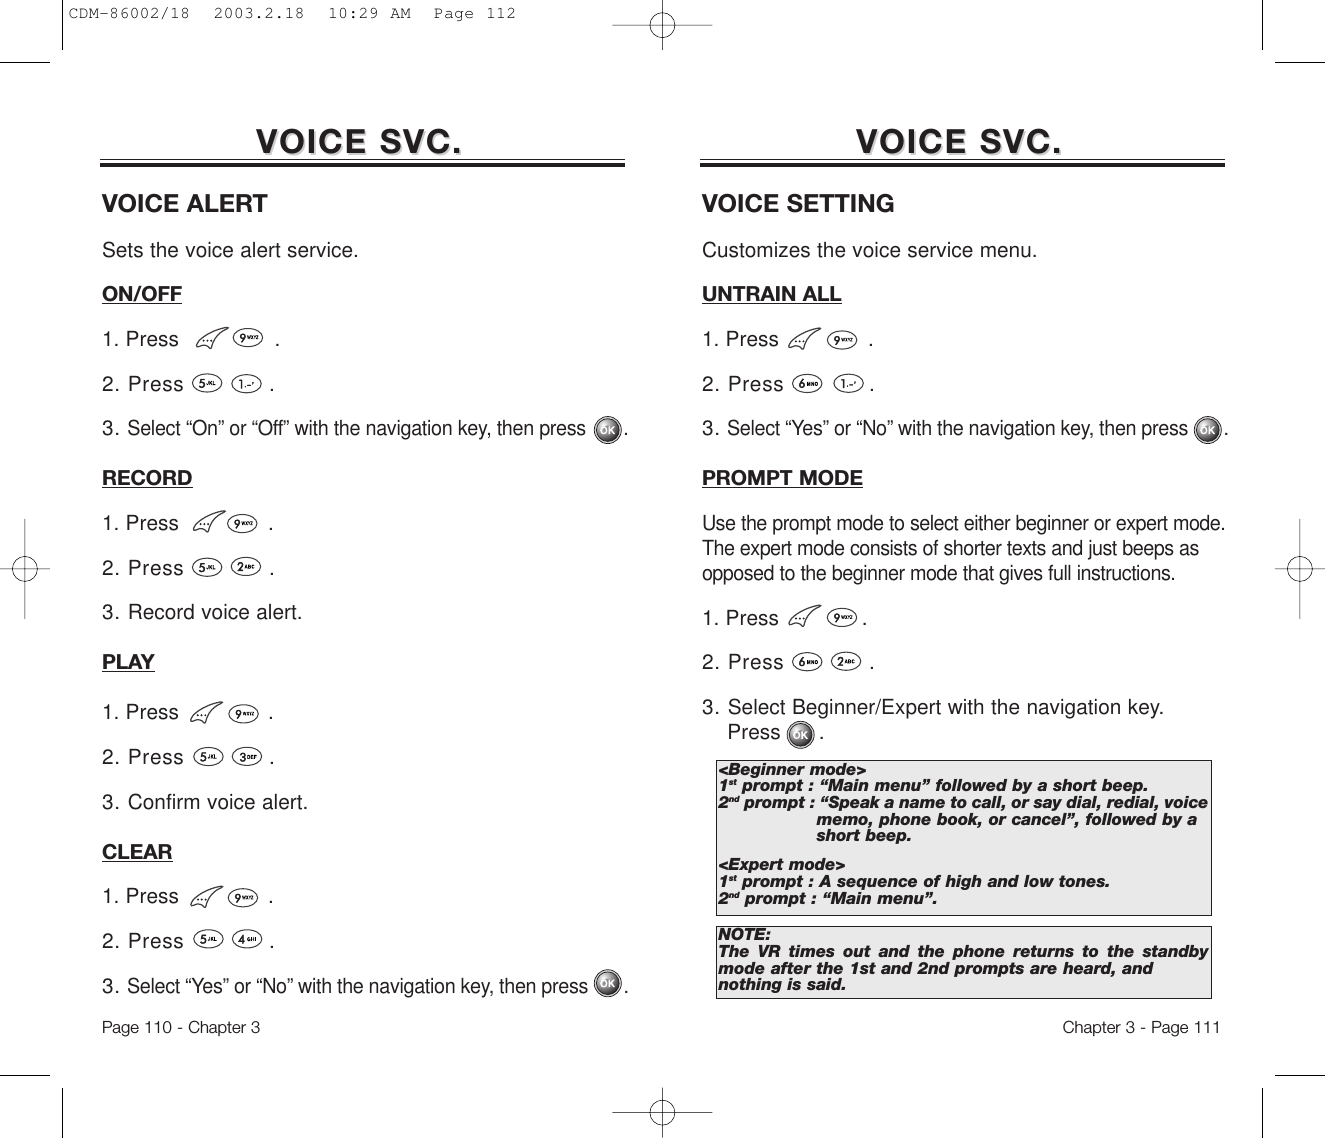 Chapter 3 - Page 111Page 110 - Chapter 3VOICE SVC.VOICE SVC. VOICE SVC.VOICE SVC.VOICE SETTINGCustomizes the voice service menu.UNTRAIN ALL1. Press              .2. Press            .3. Select “Yes” or “No” with the navigation key, then press       .PROMPT MODEUse the prompt mode to select either beginner or expert mode.The expert mode consists of shorter texts and just beeps asopposed to the beginner mode that gives full instructions.1. Press             .2. Press            .3. Select Beginner/Expert with the navigation key. Press      .&lt;Beginner mode&gt;1st prompt : “Main menu” followed by a short beep.2nd prompt : “Speak a name to call, or say dial, redial, voice memo, phone book, or cancel”, followed by a short beep.&lt;Expert mode&gt;1st prompt : A sequence of high and low tones.2nd prompt : “Main menu”.NOTE:The VR times out and the phone returns to the standbymode after the 1st and 2nd prompts are heard, andnothing is said.VOICE ALERTSets the voice alert service.ON/OFF1. Press               .2. Press            .3. Select “On” or “Off” with the navigation key, then press       .RECORD1. Press              .2. Press            .3. Record voice alert.PLAY1. Press              .2. Press            .3. Confirm voice alert.CLEAR1. Press              .2. Press            .3. Select “Yes” or “No” with the navigation key, then press       .CDM-86002/18  2003.2.18  10:29 AM  Page 112